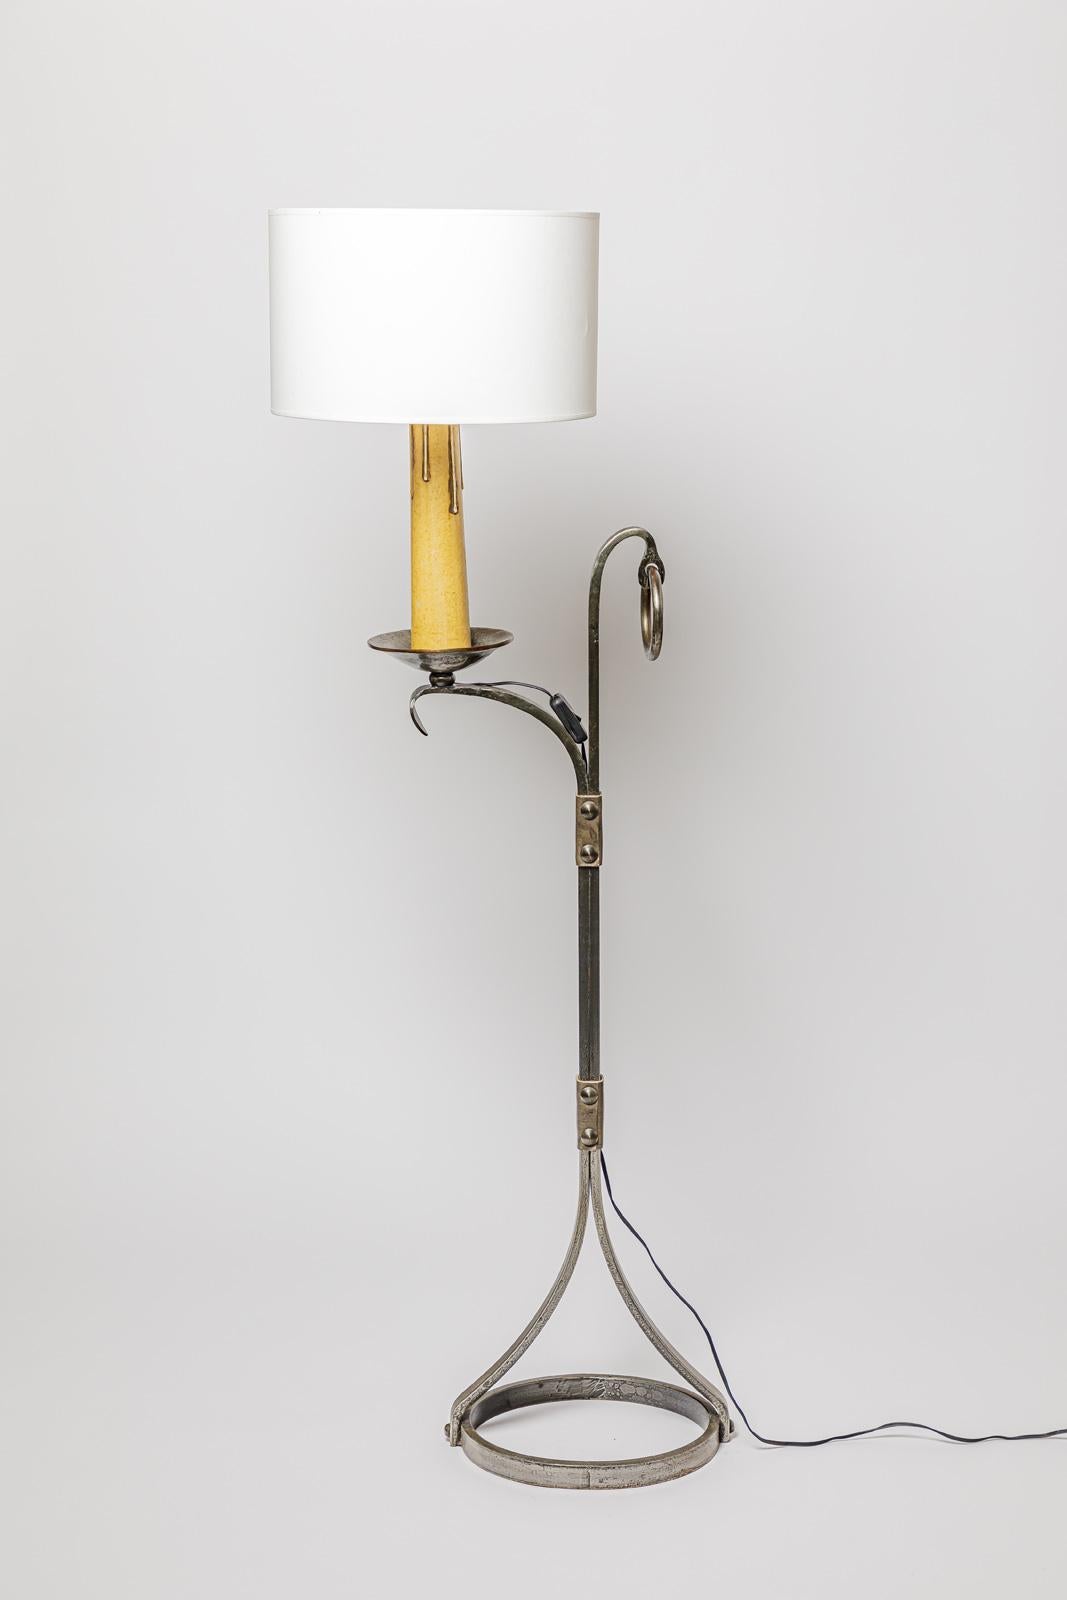 20th century floor lamp metal and leather by Jean Pierre Ryckaert Style of adnet For Sale 2